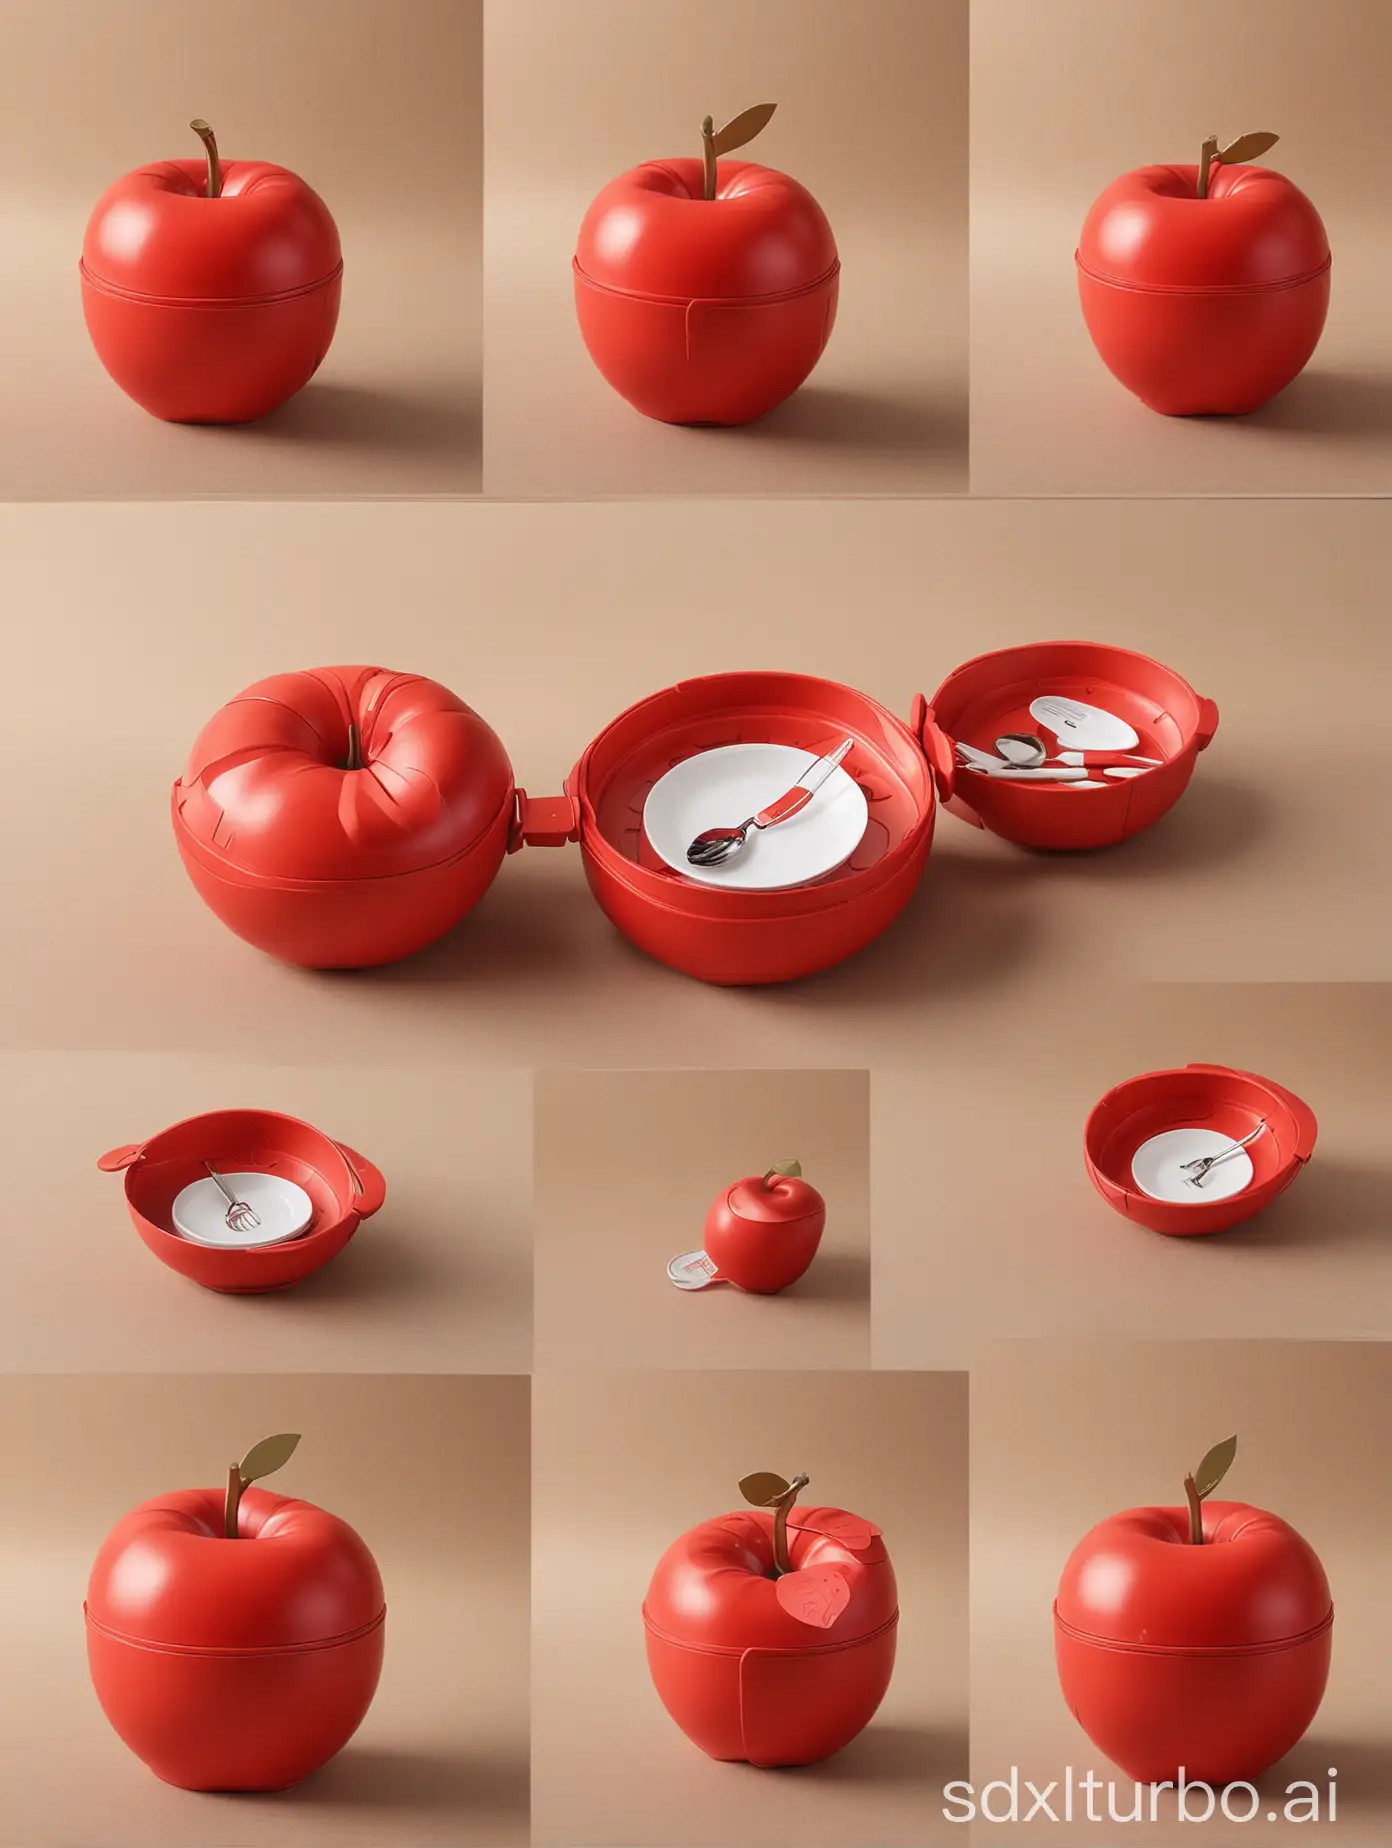 Product design Multi-functional portable tableware box, is the portable tableware box shaped like a red apple, creative design, Industrial storyboard design, detail design, sketch style, step-by-step deduction for drawing a Multi-functional portable tableware box